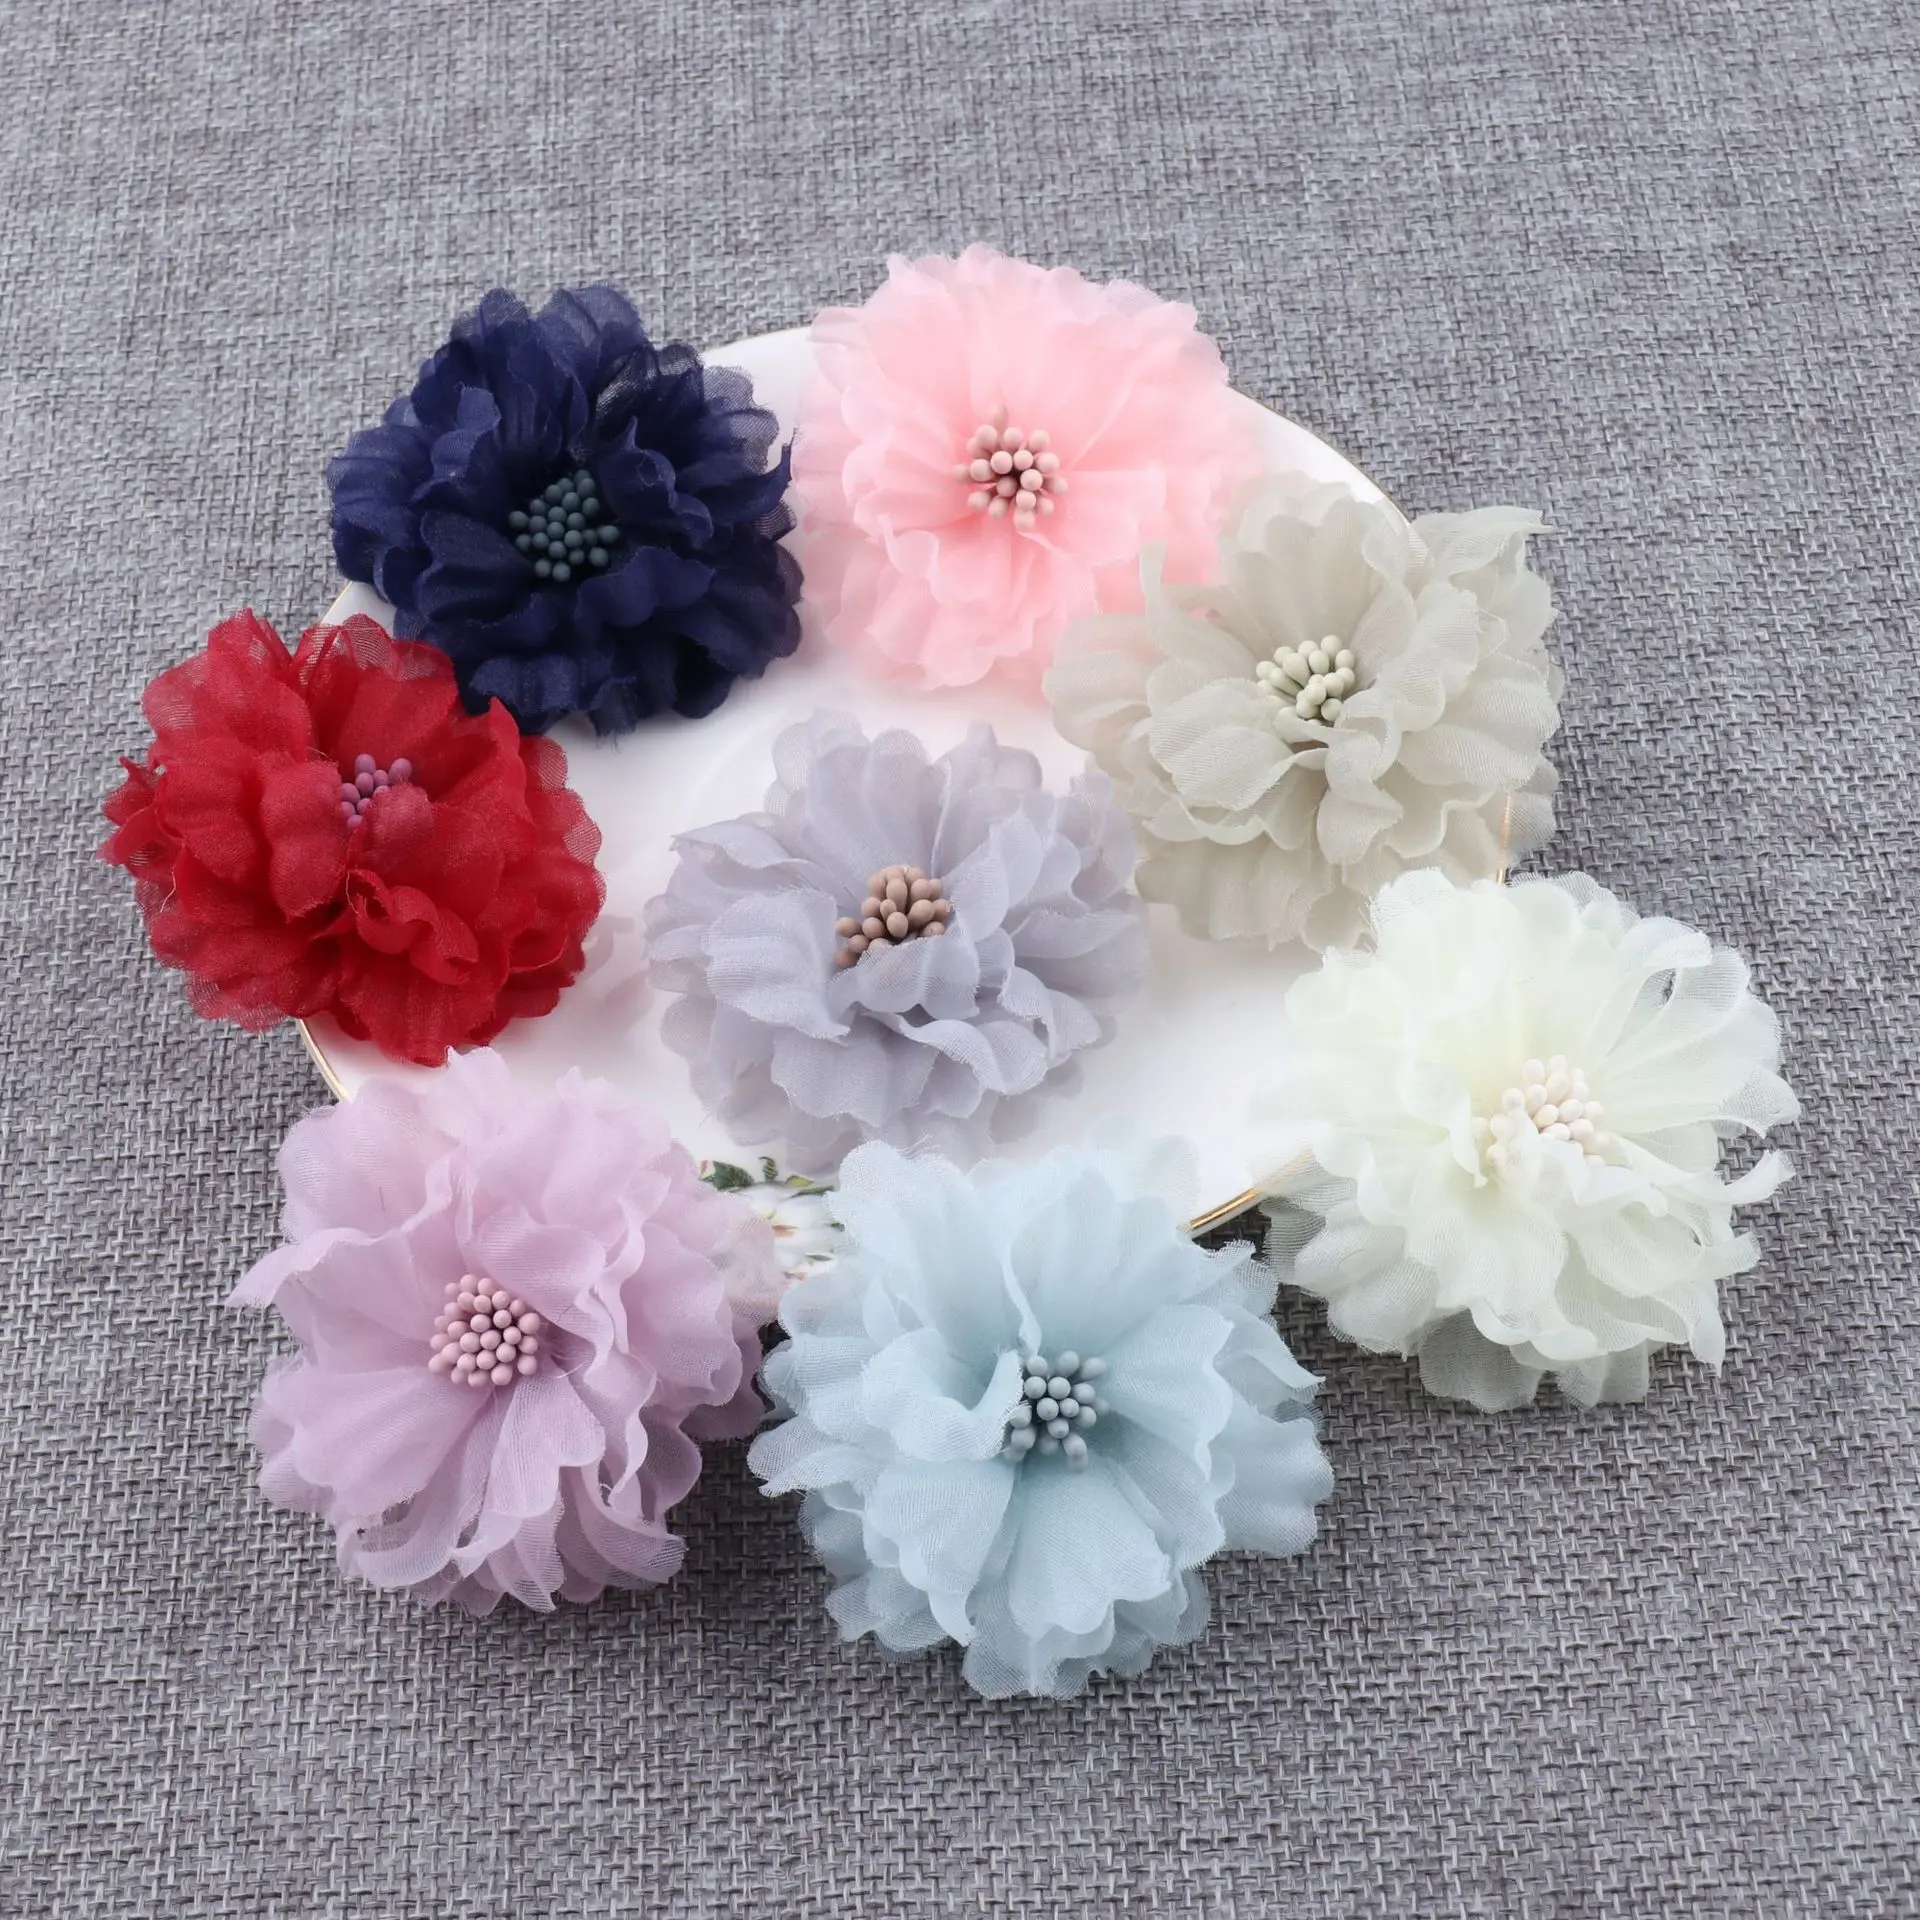 100pcs Fabric Artificial Lace Flower Chiffon Flower For Hair Accessories Headband Patch Applique Wedding Dress DIY Shoes Flower furry car armrest covers auto center console artificial wool fur soft fluffy box pad covers universal car interior accessories